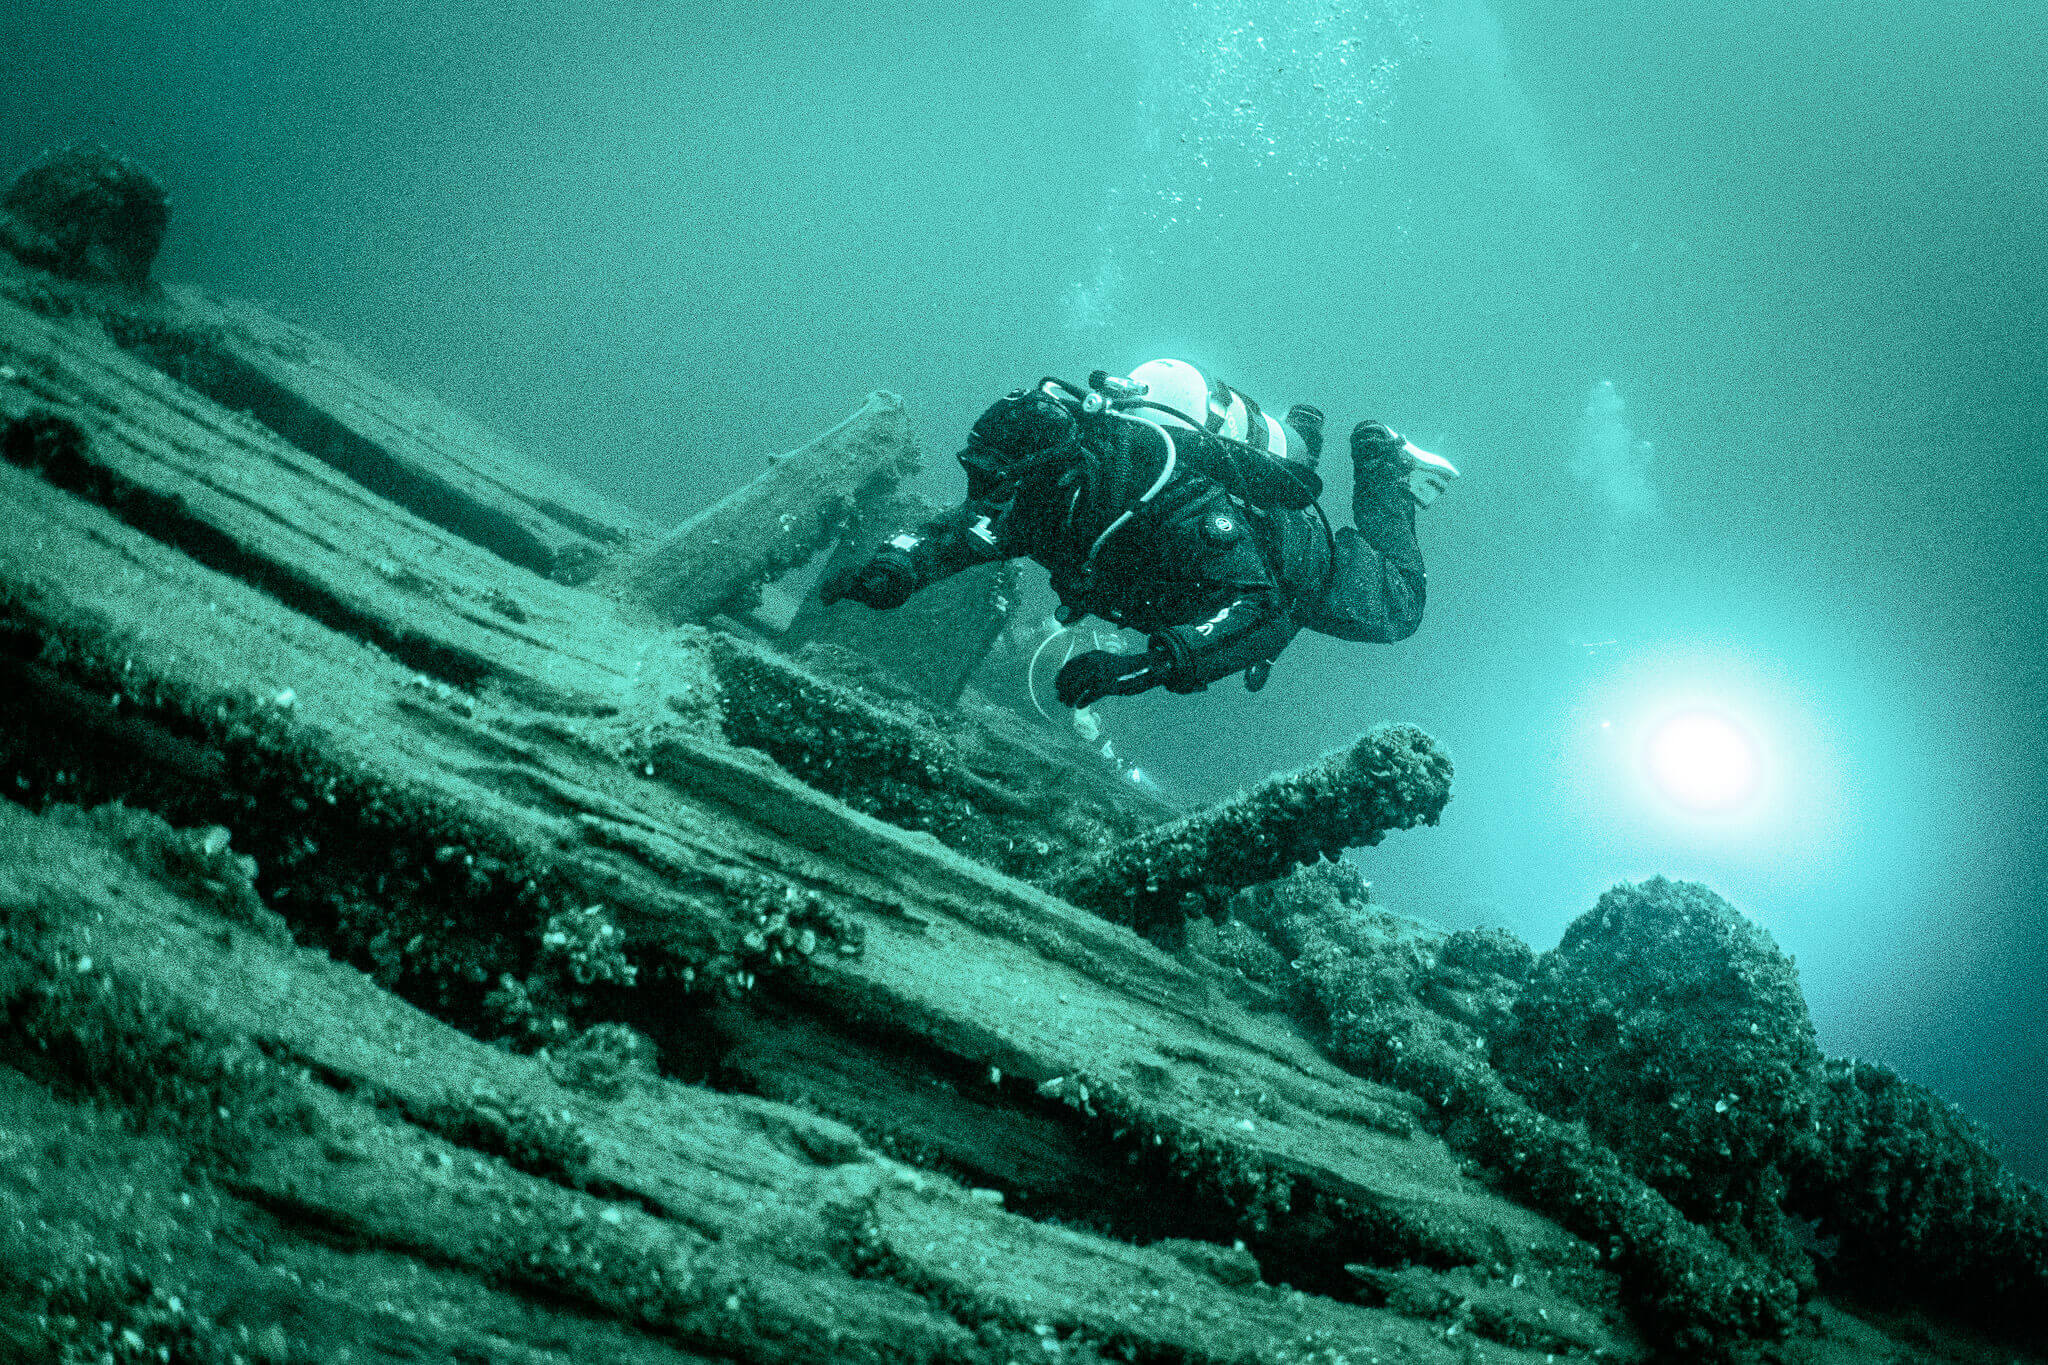 Underwater photo of a scuba diver exploring the Ash Island Barge in the St. Lawrence River